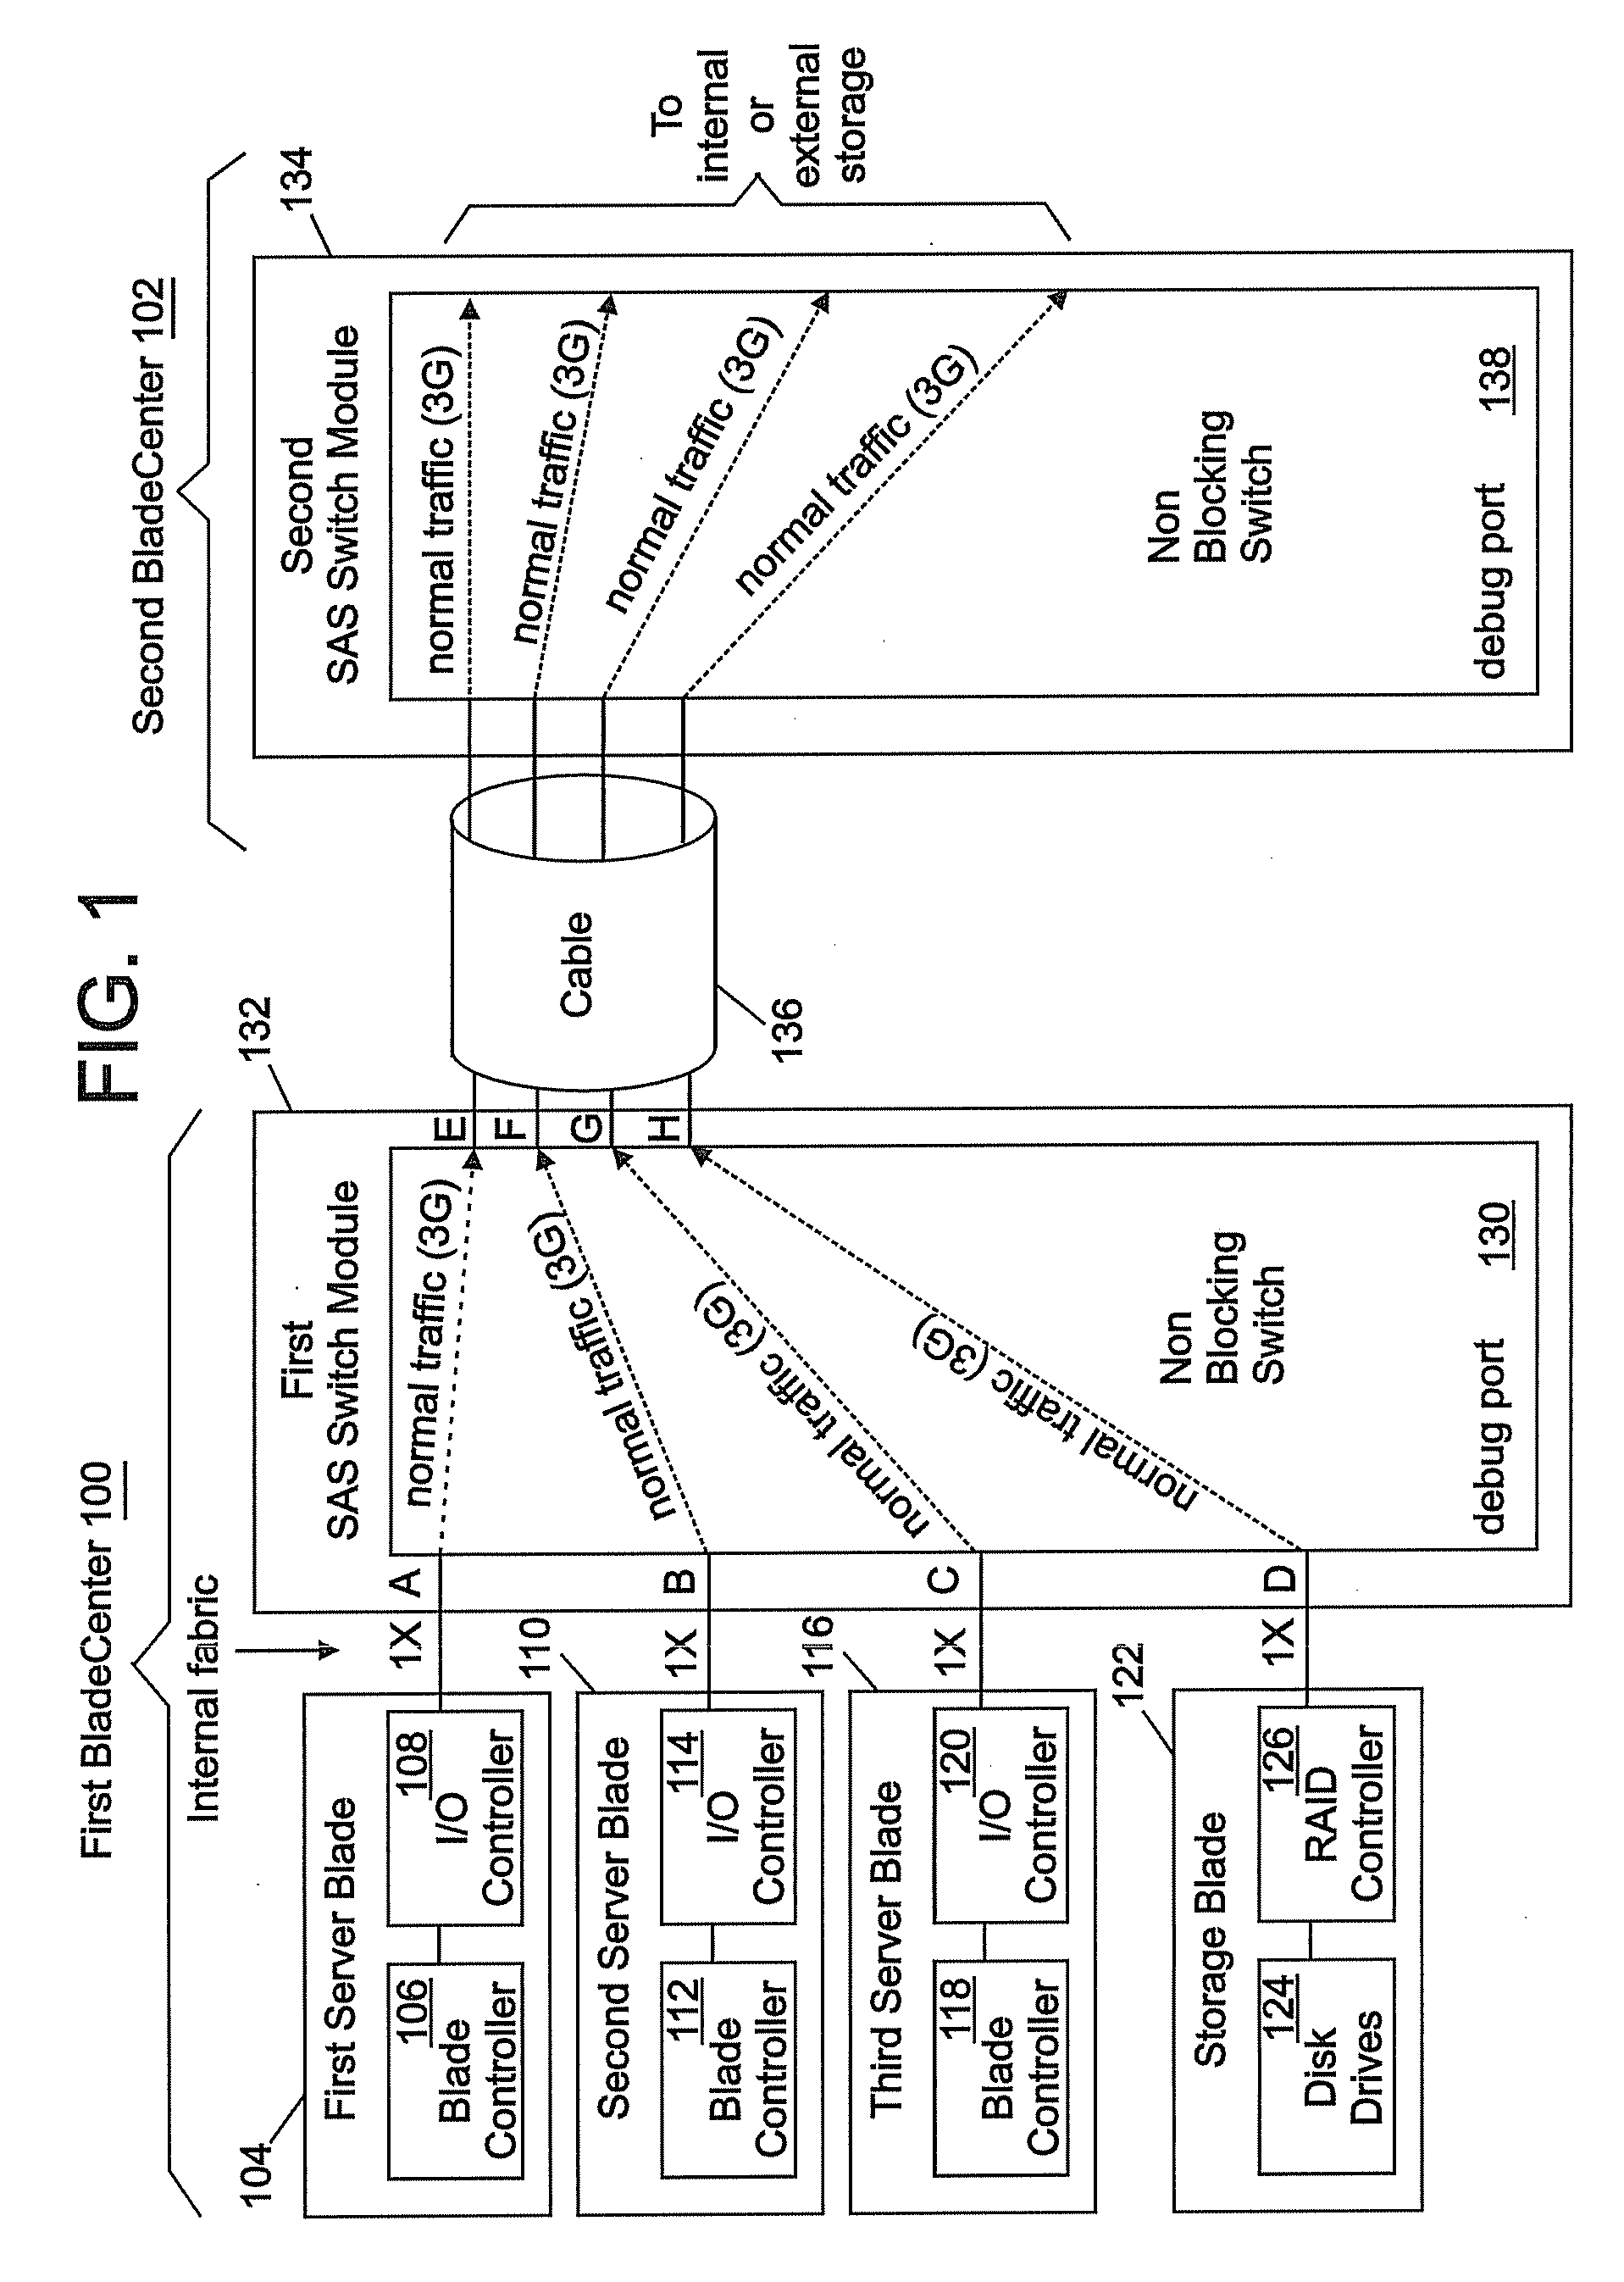 Method, system and computer program product for providing high speed fault tracing within a blade center system